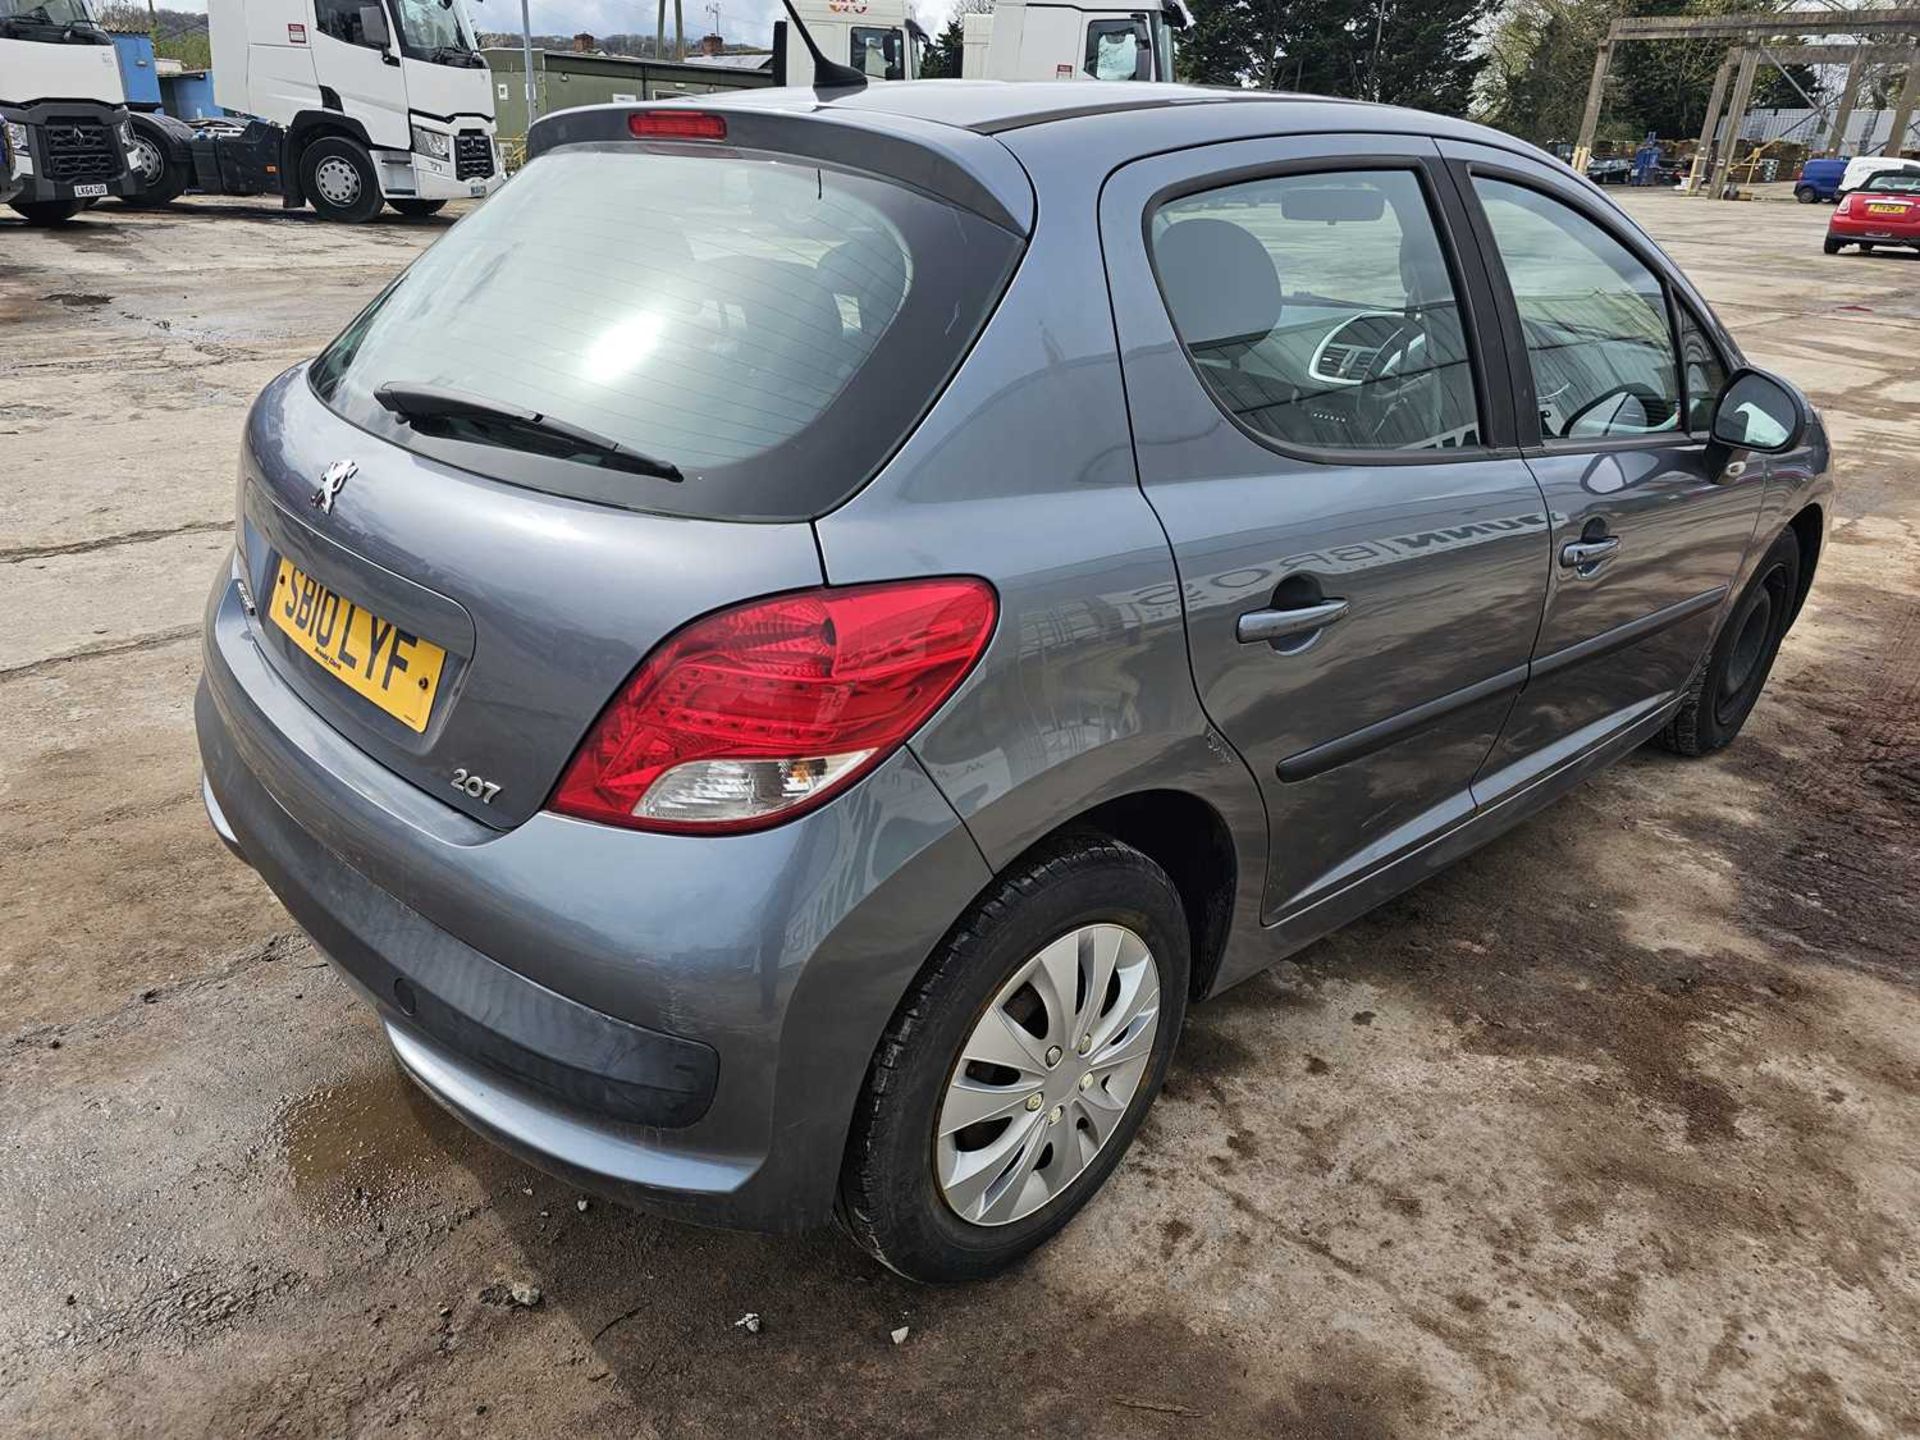 2010 Peugeot 207 S HDi, 5 Speed (Reg. Docs. Available) - Image 2 of 27